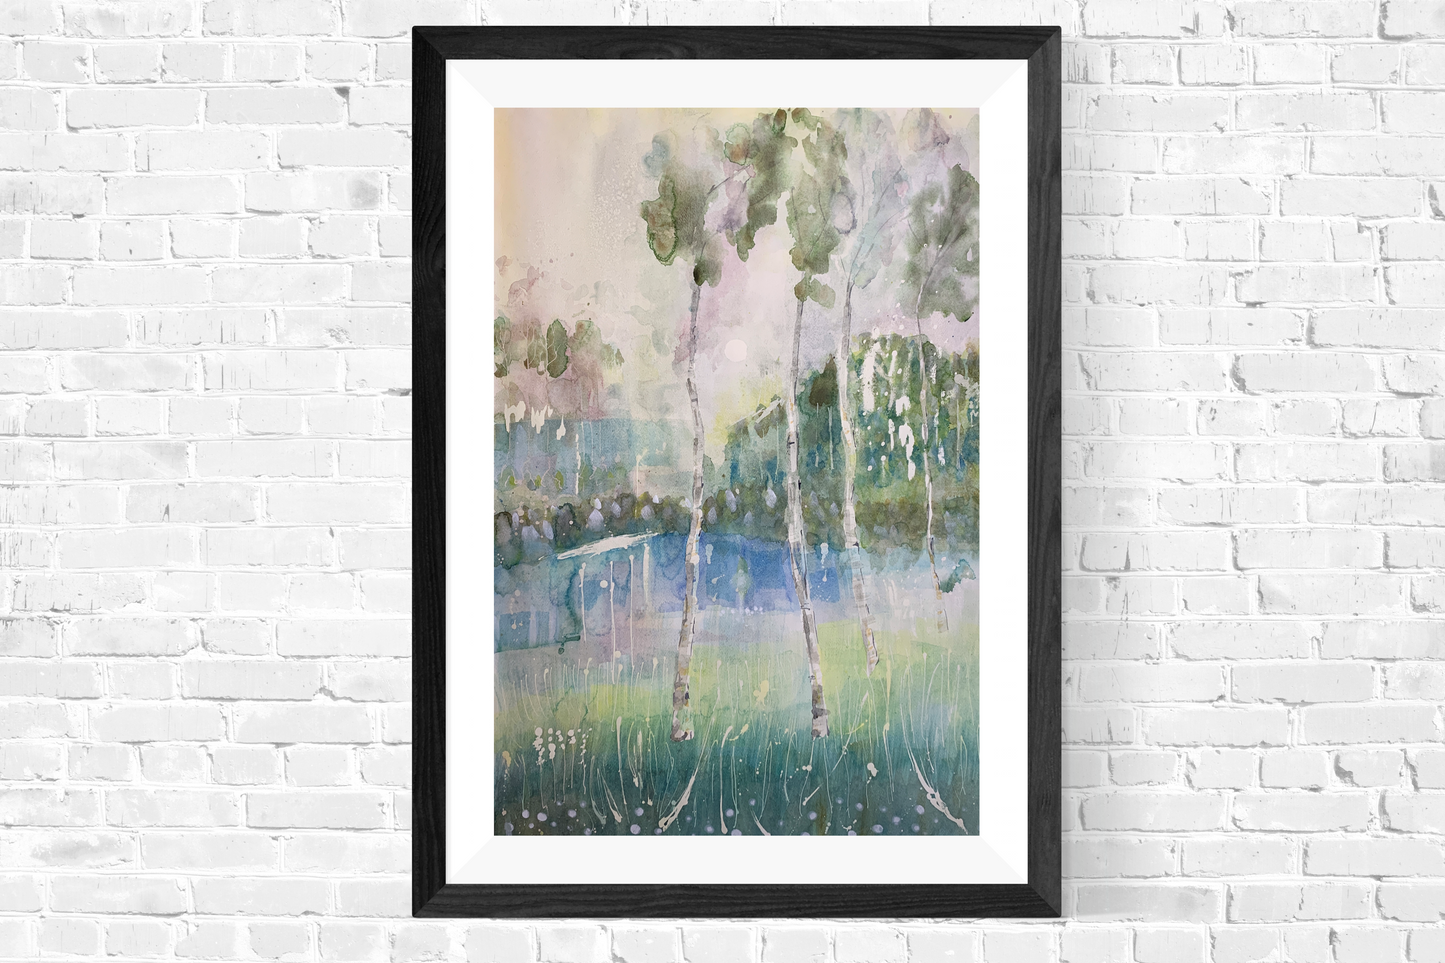 Original impressionist painting in the style of Monet. Early morning landscape emotive painting